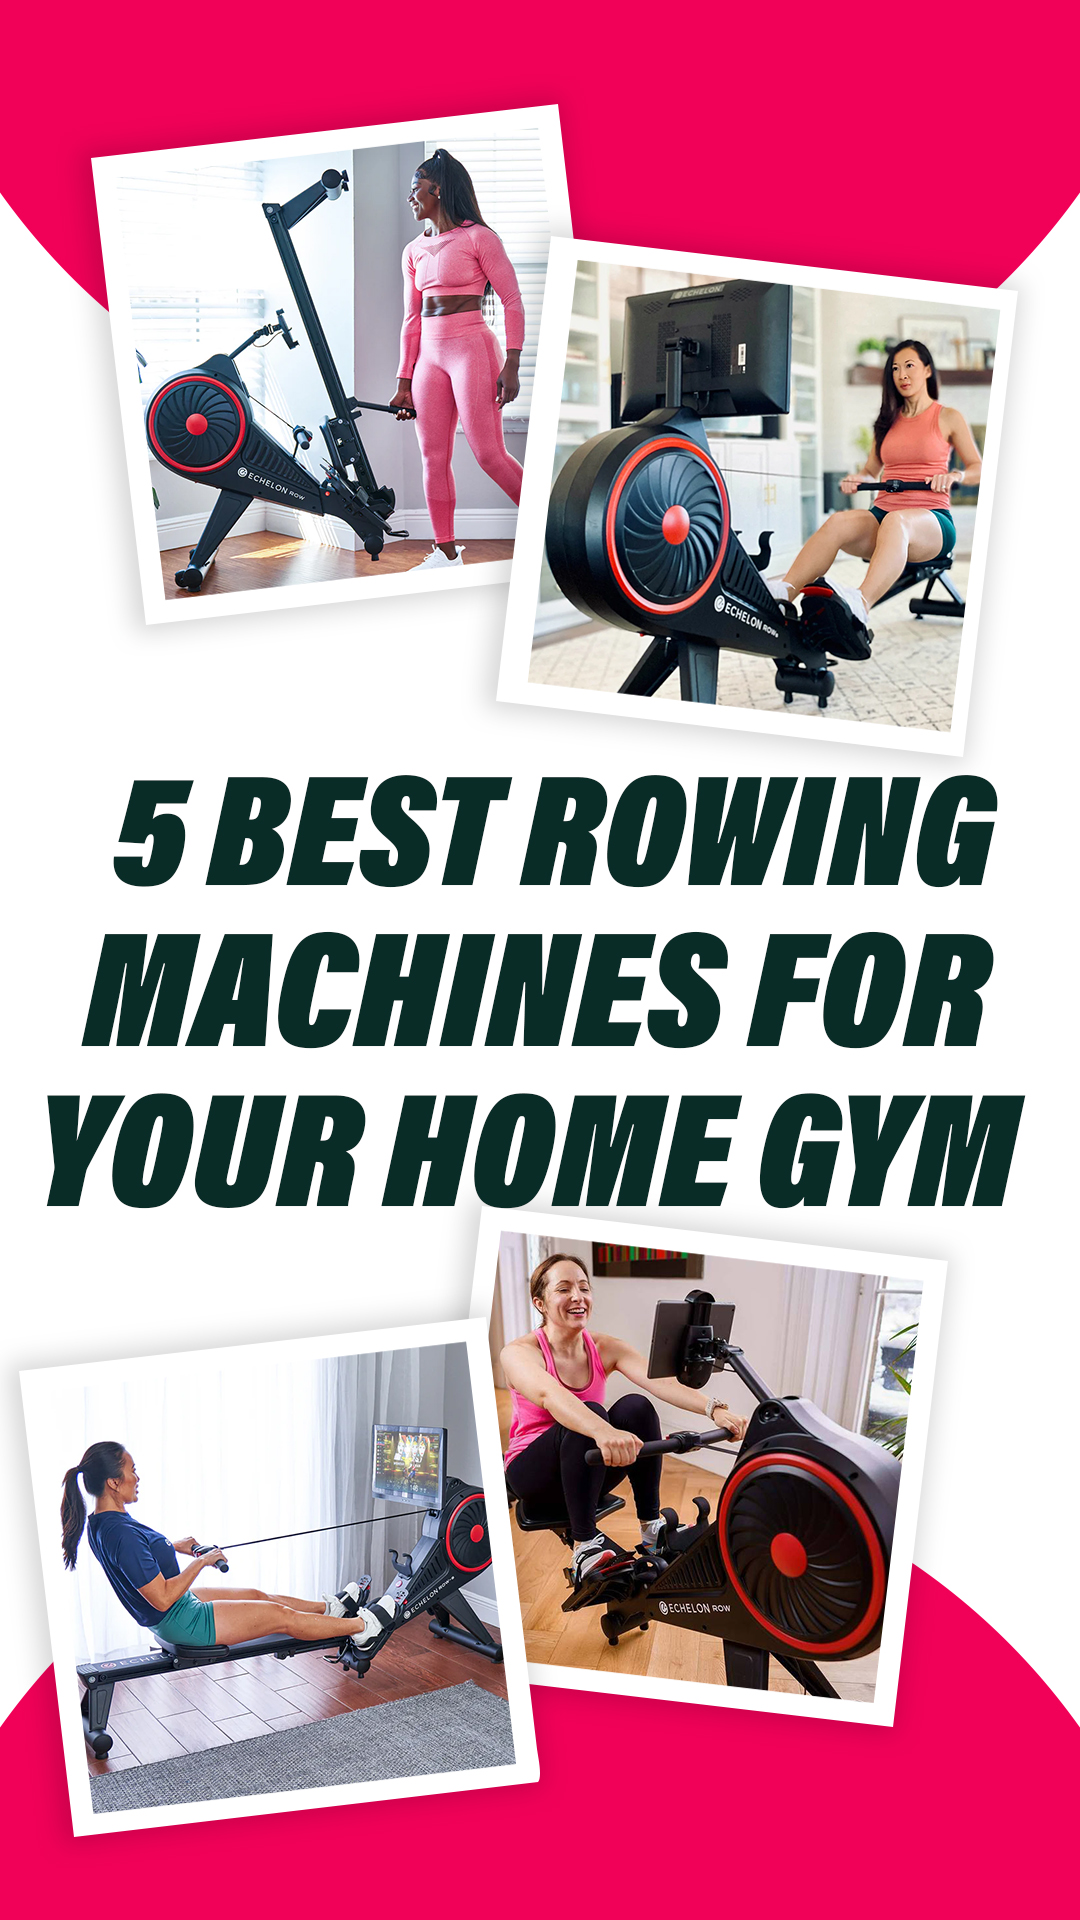 5 Best Rowing Machines for Your Home Gym